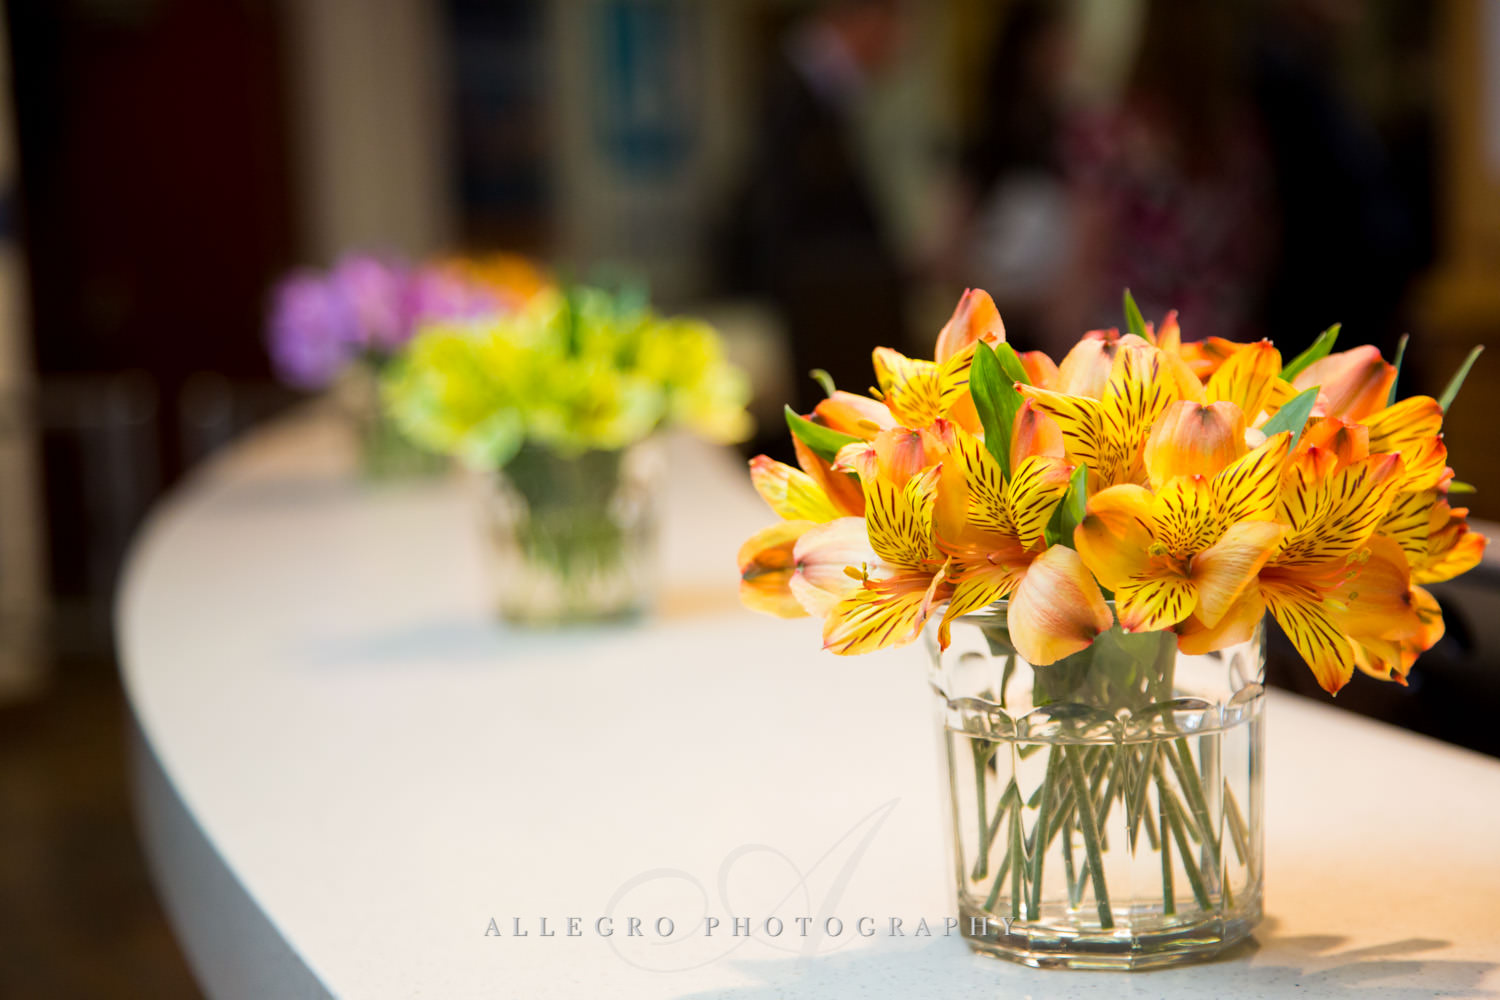 Floral photo by Allegro Photography at the nonprofit JCC@333